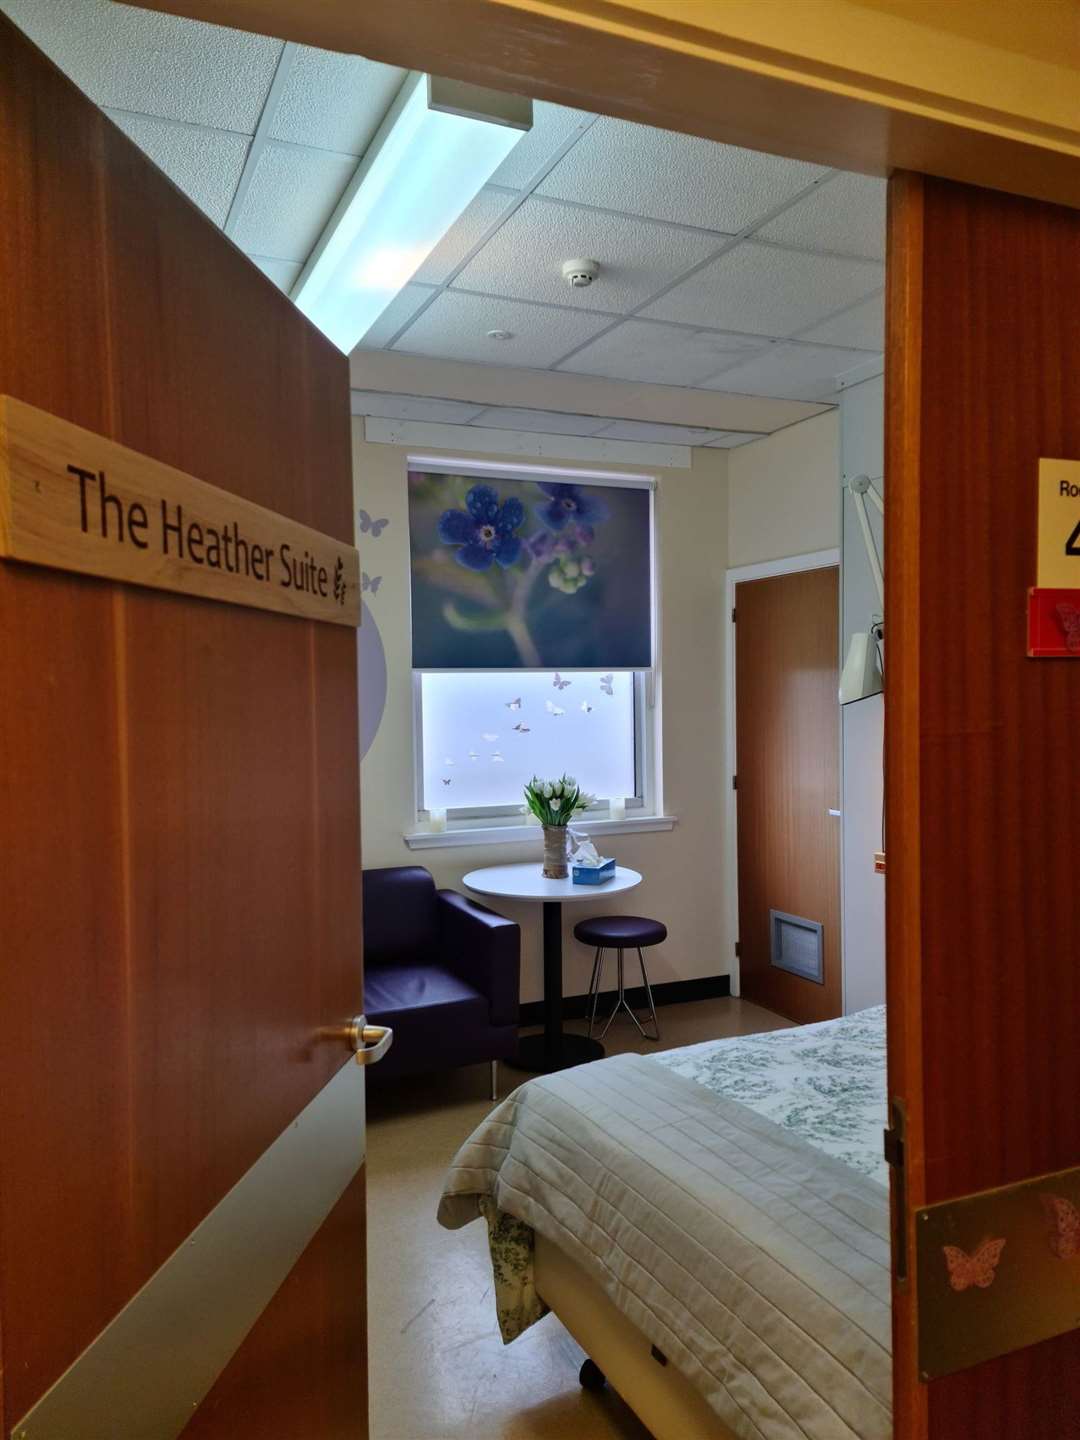 The Heather Suite at Raigmore Hospital will provide a space for bereaved parents.